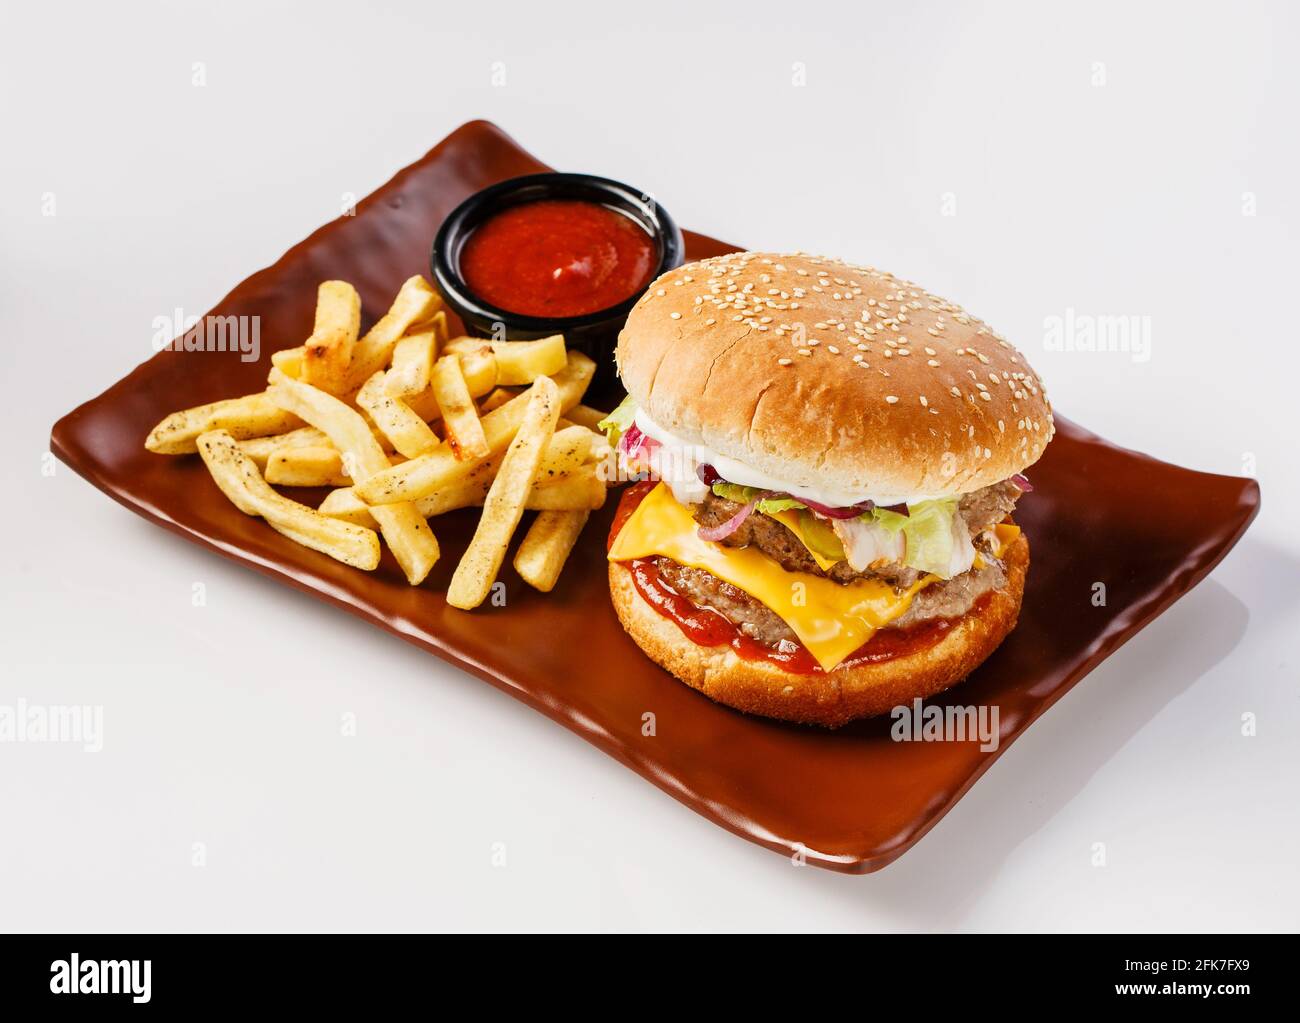 Burger. Juicy pork cutlet, cheddar cheese, crispy pickled onions, lettuce wrapped in a bun under two sauces. Served with french fries and cream sauce. Stock Photo